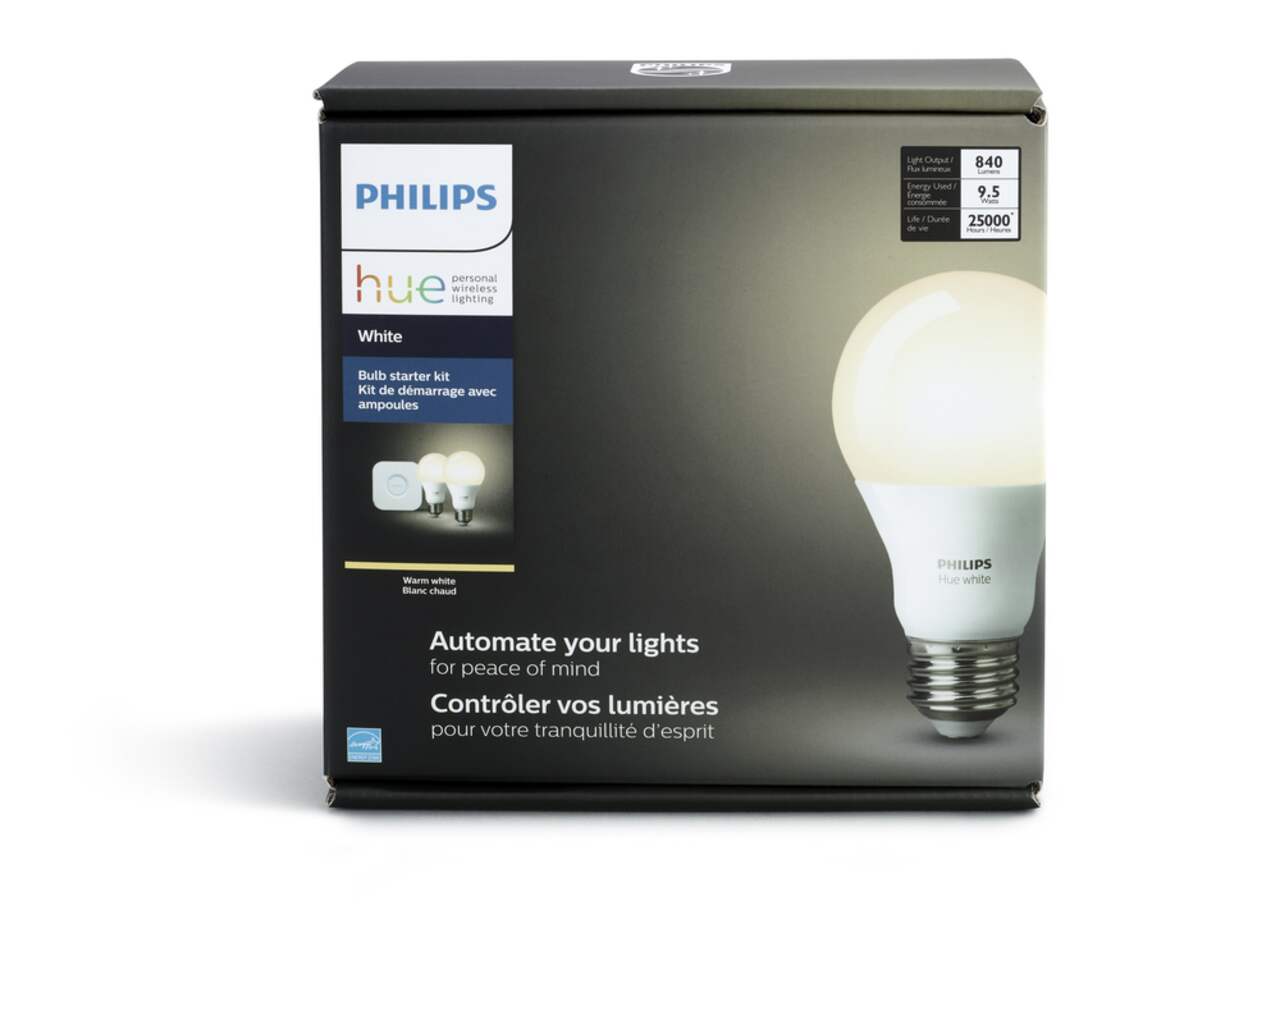 Philips Hue starter kits make for a worthy, but expensive entry